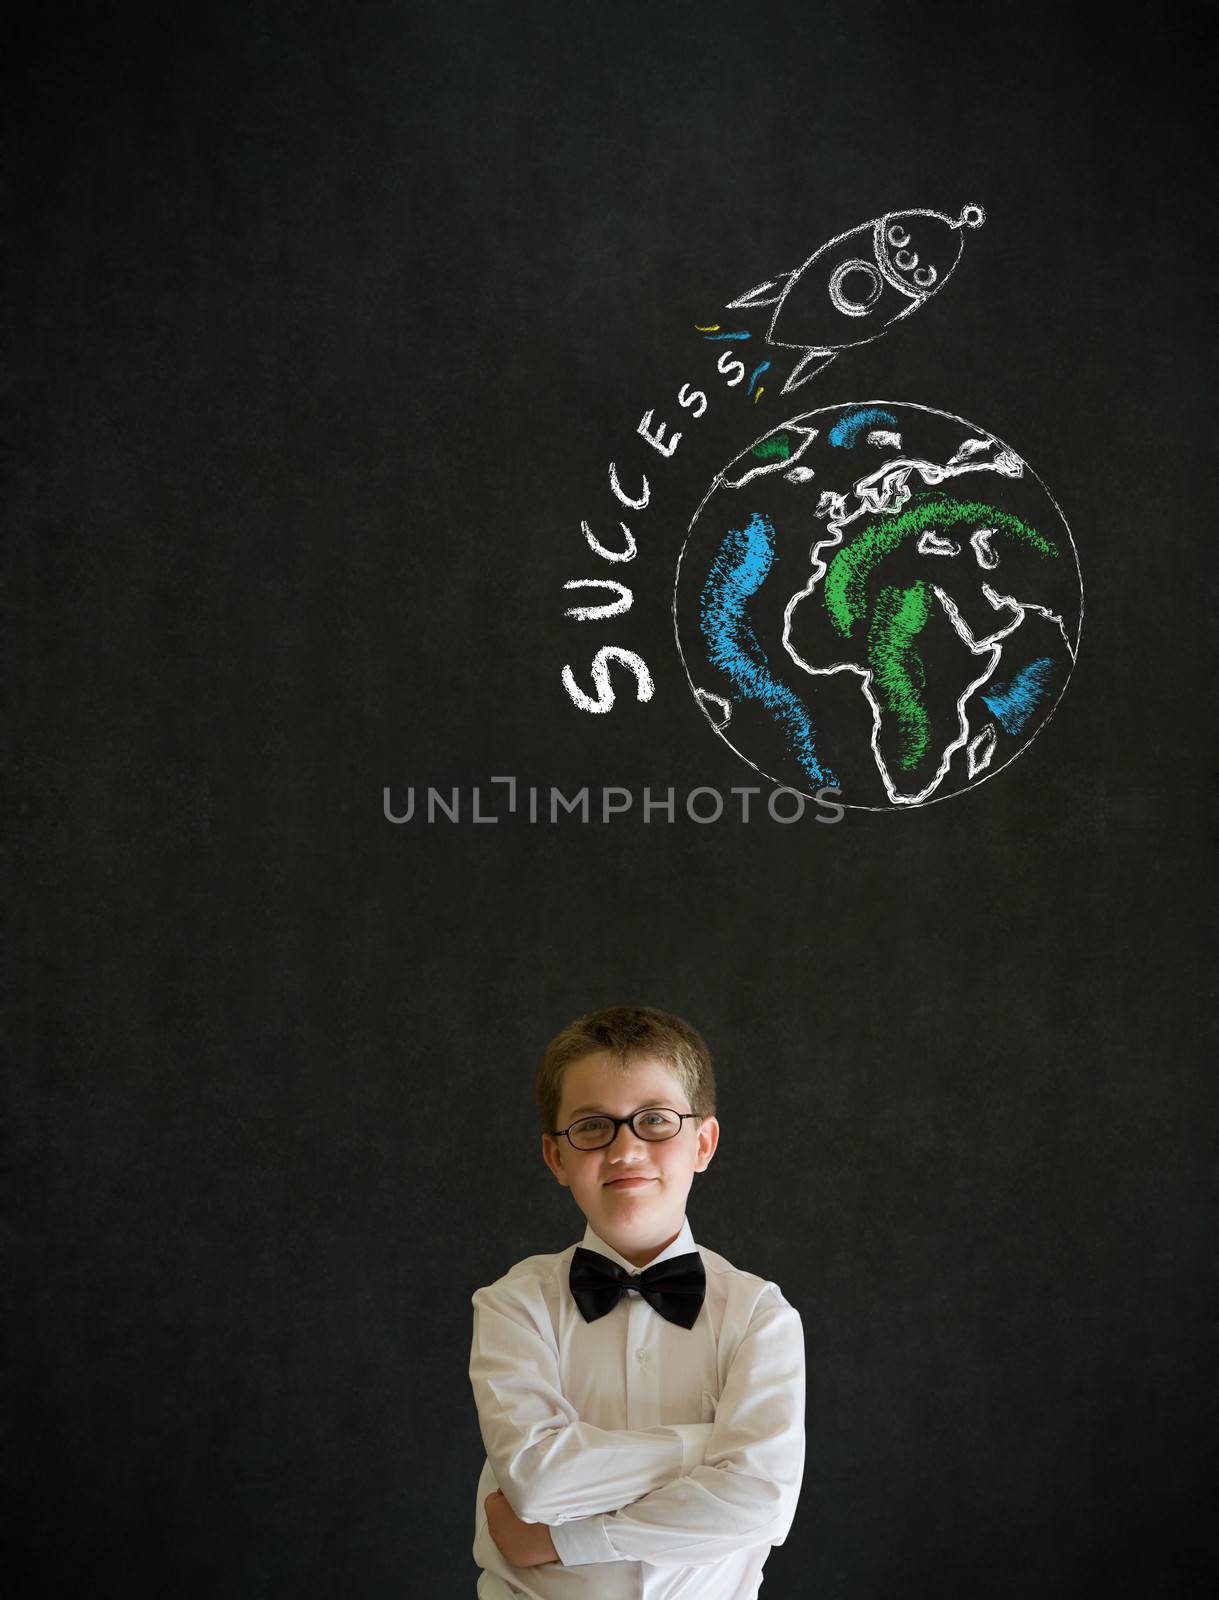 Thinking boy dressed up as business man with chalk globe and jet world travel on blackboard background